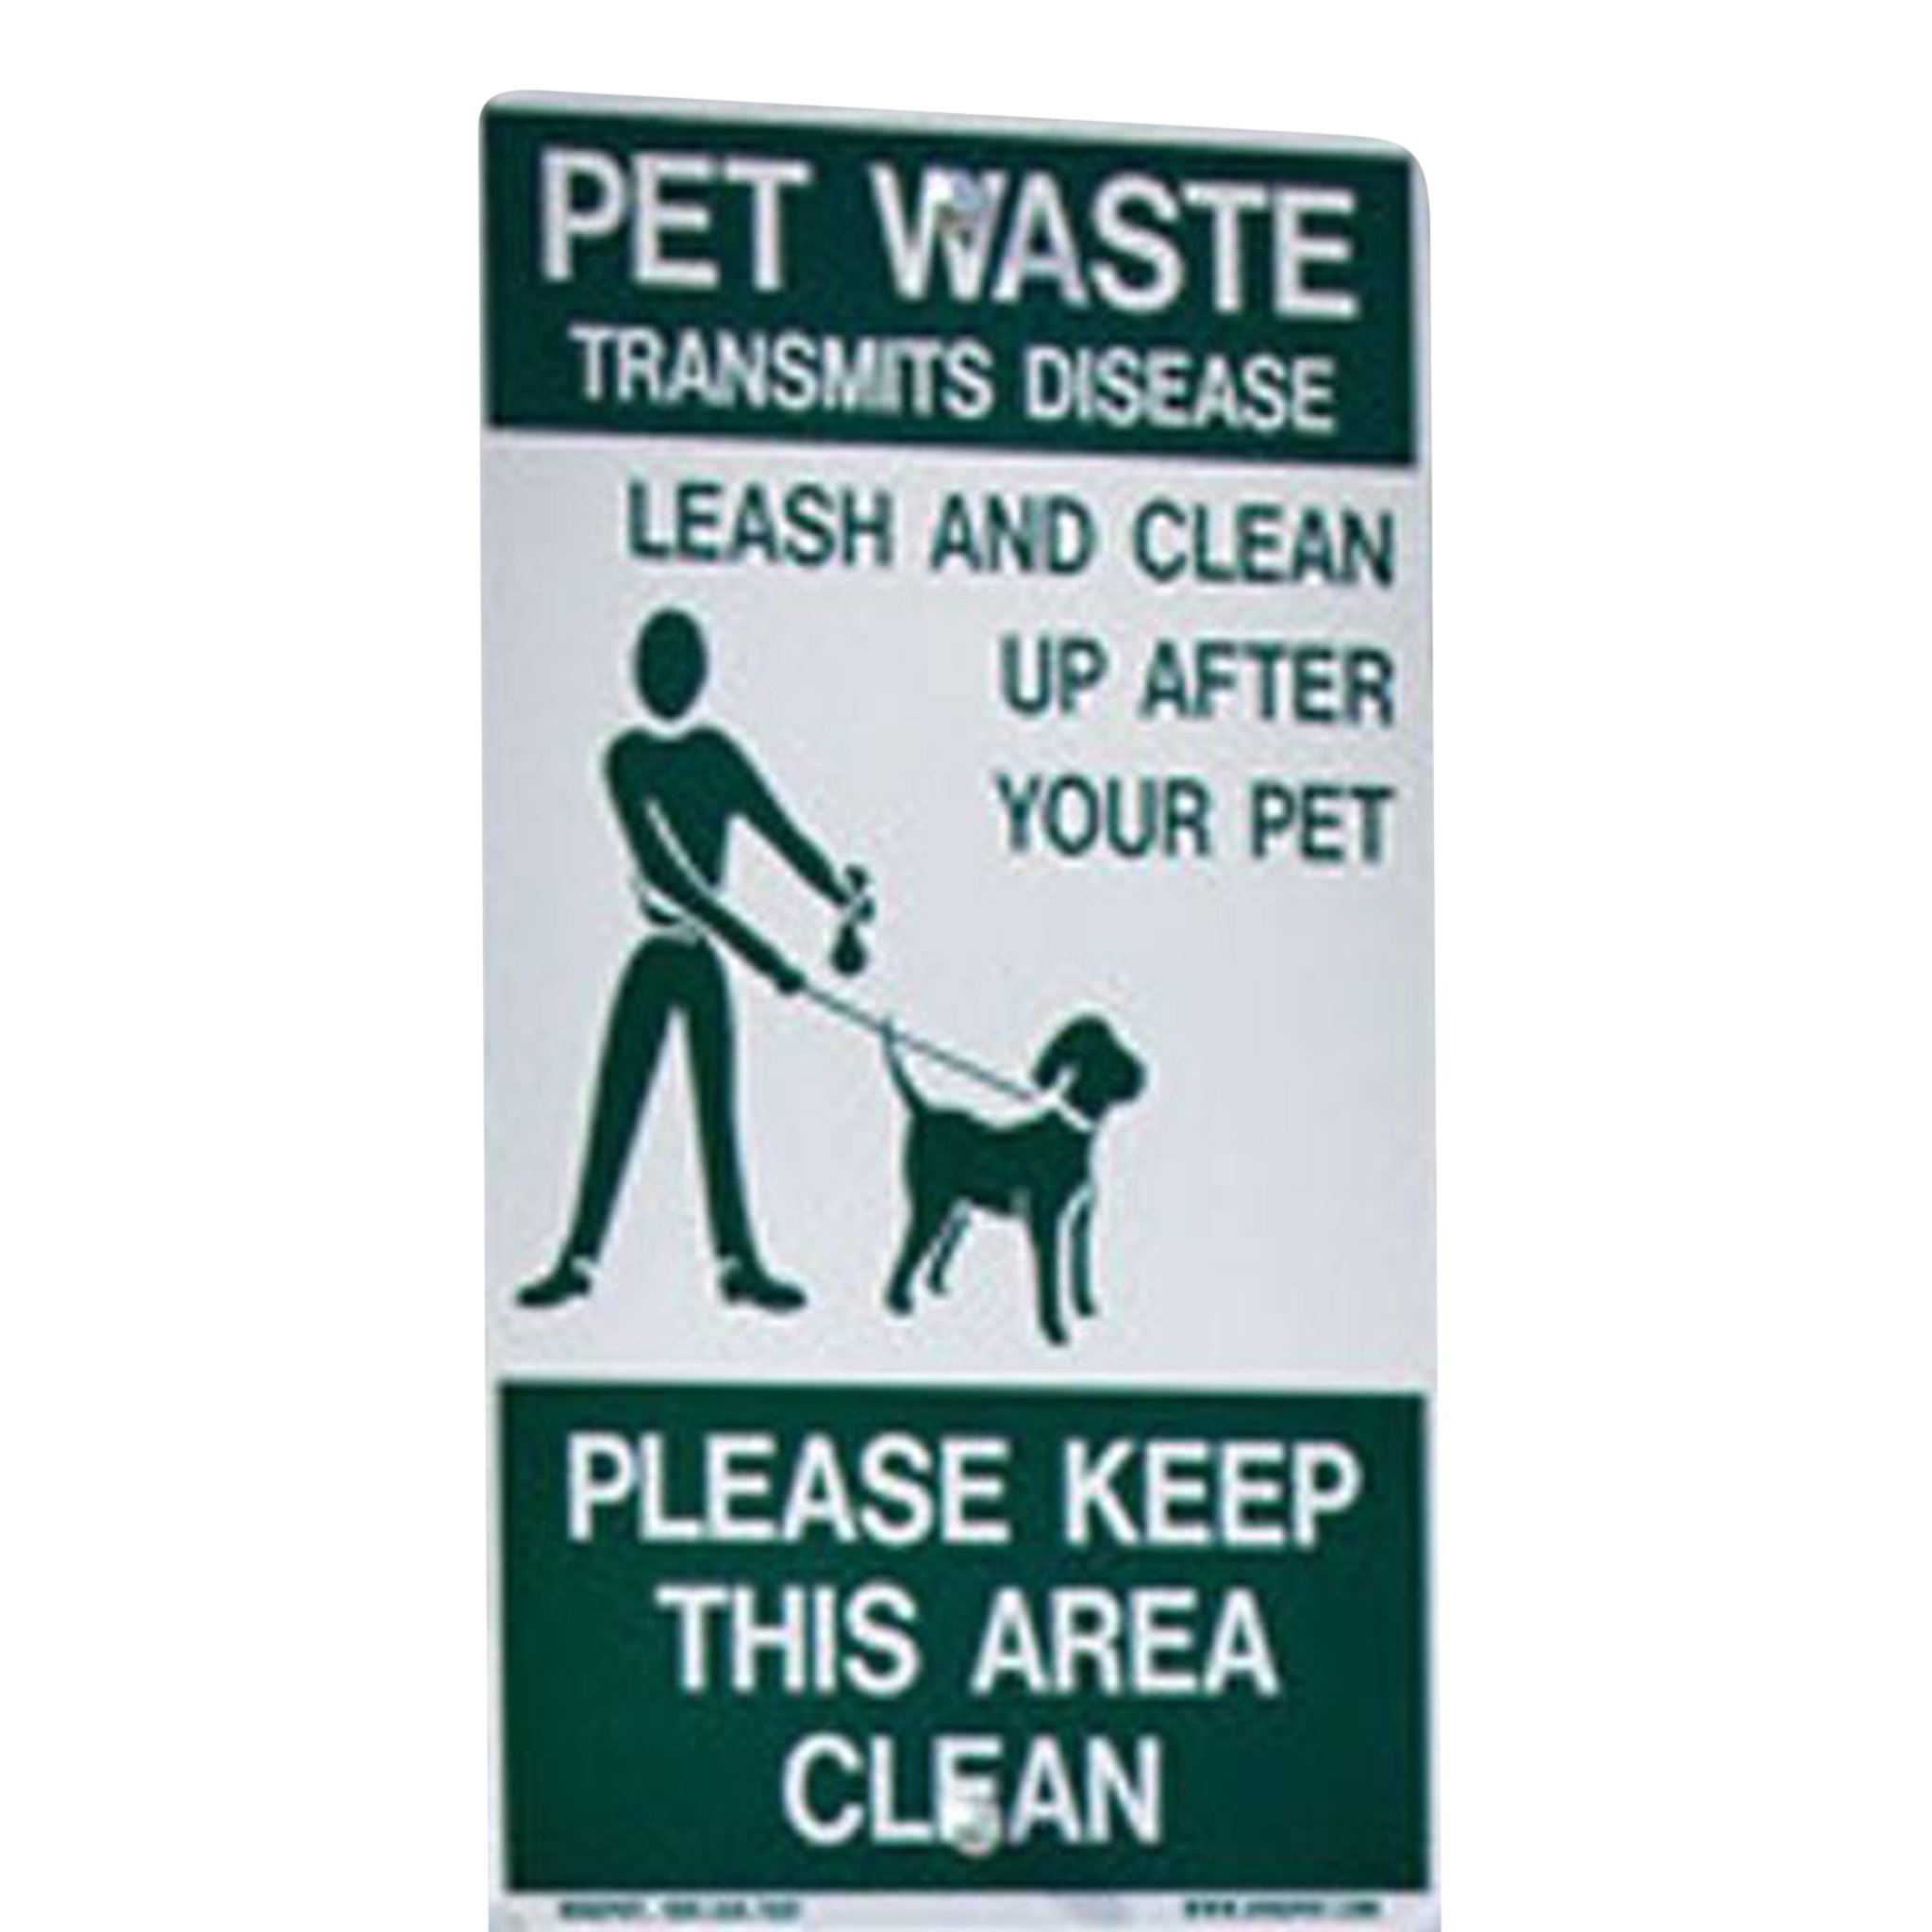 After your pet. Pet sign. Please clean after your Pet. Keep Pets Leashed знак. Сервис please Pet.